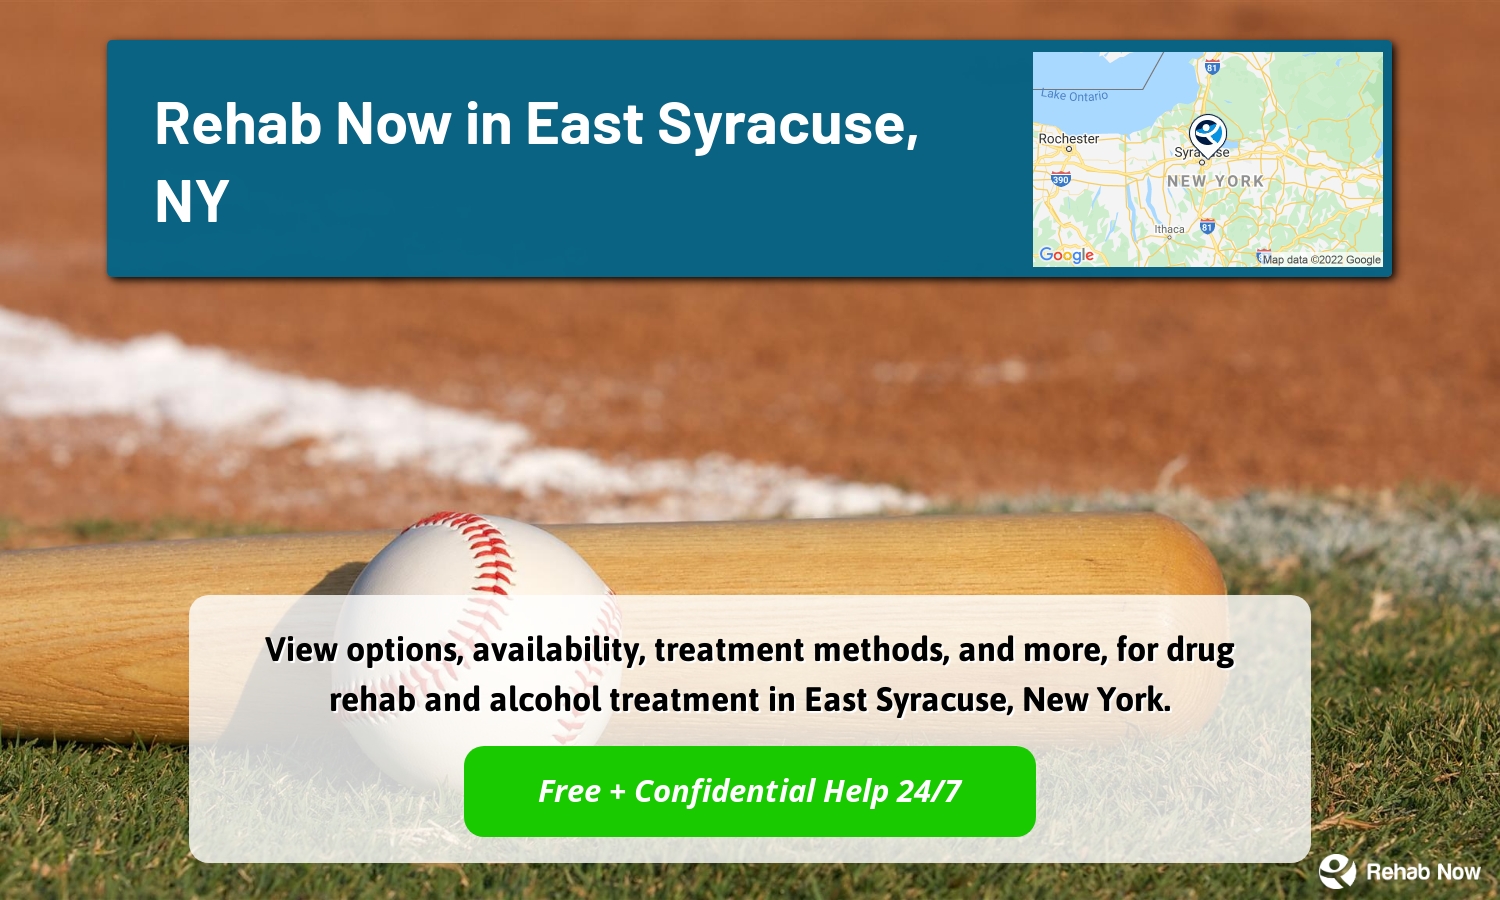 View options, availability, treatment methods, and more, for drug rehab and alcohol treatment in East Syracuse, New York.